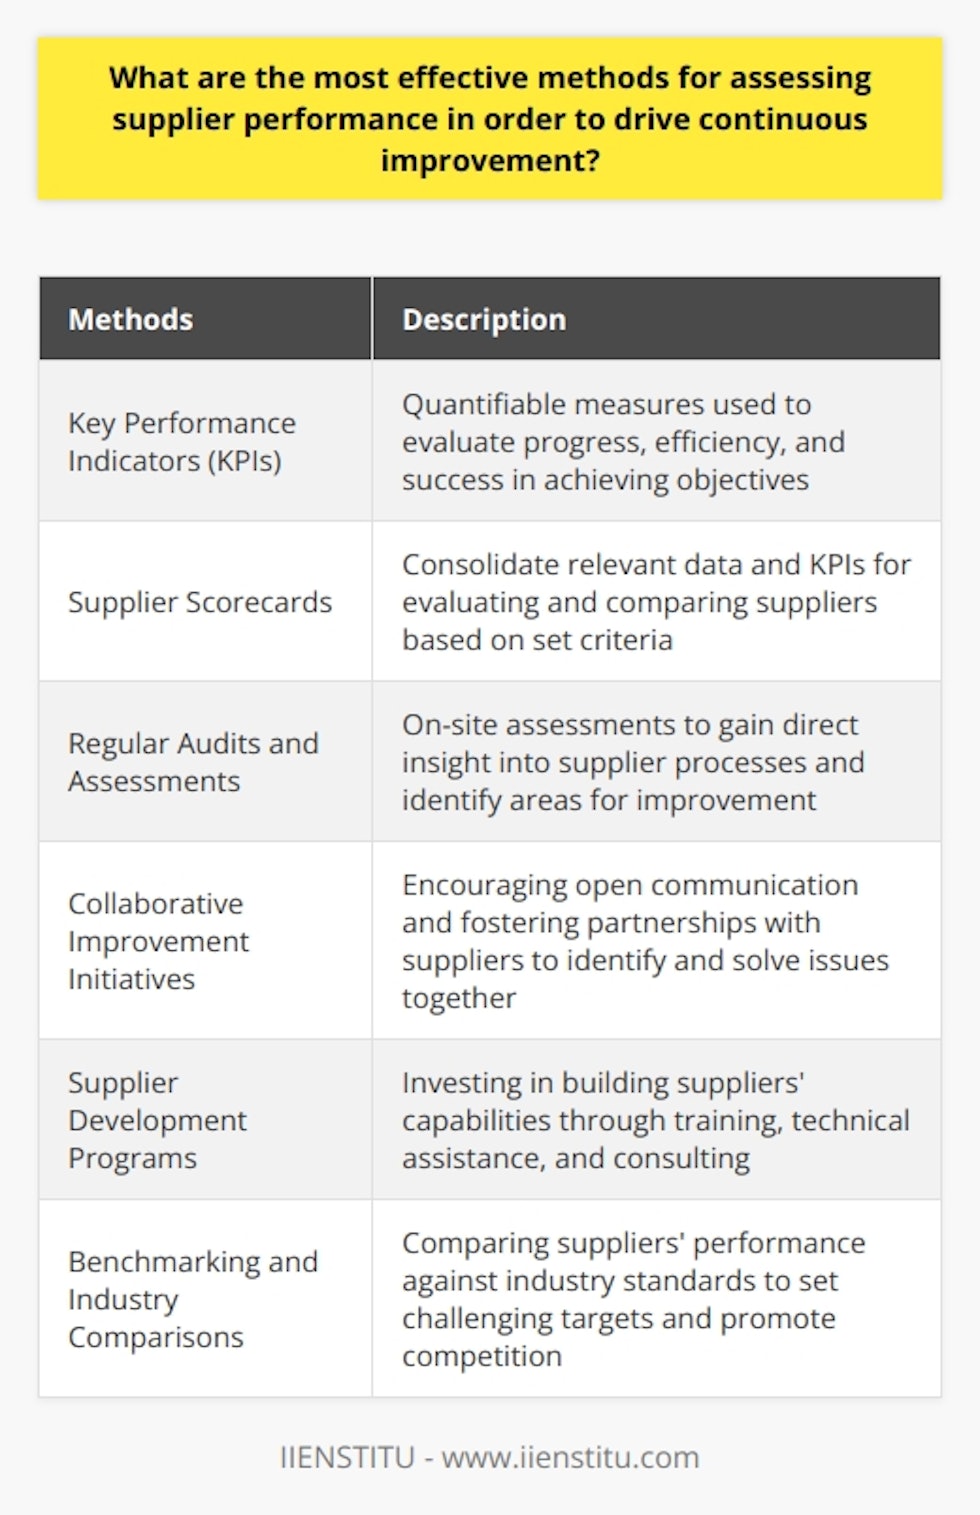 In order to drive continuous improvement in supplier performance, there are several effective methods that can be utilized. One of the most important methods is the establishment and tracking of Key Performance Indicators (KPIs). These are quantifiable measures that are used to evaluate progress, efficiency, and success in achieving predefined objectives. By setting and regularly monitoring KPIs, companies can have an objective basis to assess supplier performance and identify areas that need improvement.Another effective method is the use of supplier scorecards. These scorecards consolidate relevant data and KPIs, allowing companies to evaluate and compare suppliers based on a predetermined set of criteria. Supplier scorecards enable quick comparisons between different suppliers and help identify performance trends over time.Regular audits and assessments of supplier operations are also crucial in driving continuous improvement. Conducting on-site assessments provides direct insight into the supplier's processes and can help identify potential bottlenecks or areas for improvement. Additionally, regular communication between the company and the supplier can highlight any possible issues before they escalate, allowing for more efficient problem resolution.Collaborative improvement initiatives are another effective method. By encouraging open communication and fostering partnerships, companies can work closely with suppliers to identify issues and develop joint solutions. This collaborative approach can lead to significant performance enhancements.Implementing supplier development programs is also a highly effective method for continuous improvement. These programs involve investing time and resources in building suppliers' capabilities. This may include training, technical assistance, and consulting to help suppliers enhance their skills, adopt industry best practices, and improve their overall performance.Lastly, benchmarking and industry comparisons can also drive continuous improvement in supplier performance. By comparing suppliers' performance against industry standards, companies can identify top performers and set challenging targets. This promotes a competitive culture and encourages suppliers to strive for better delivery, quality, and overall service.In conclusion, effective methods for assessing supplier performance to drive continuous improvement include establishing and tracking KPIs, utilizing supplier scorecards, conducting regular audits and assessments, promoting collaborative improvement initiatives, implementing supplier development programs, and benchmarking against industry standards. These methods can significantly enhance supplier performance and ultimately result in better delivery, quality, and overall service.